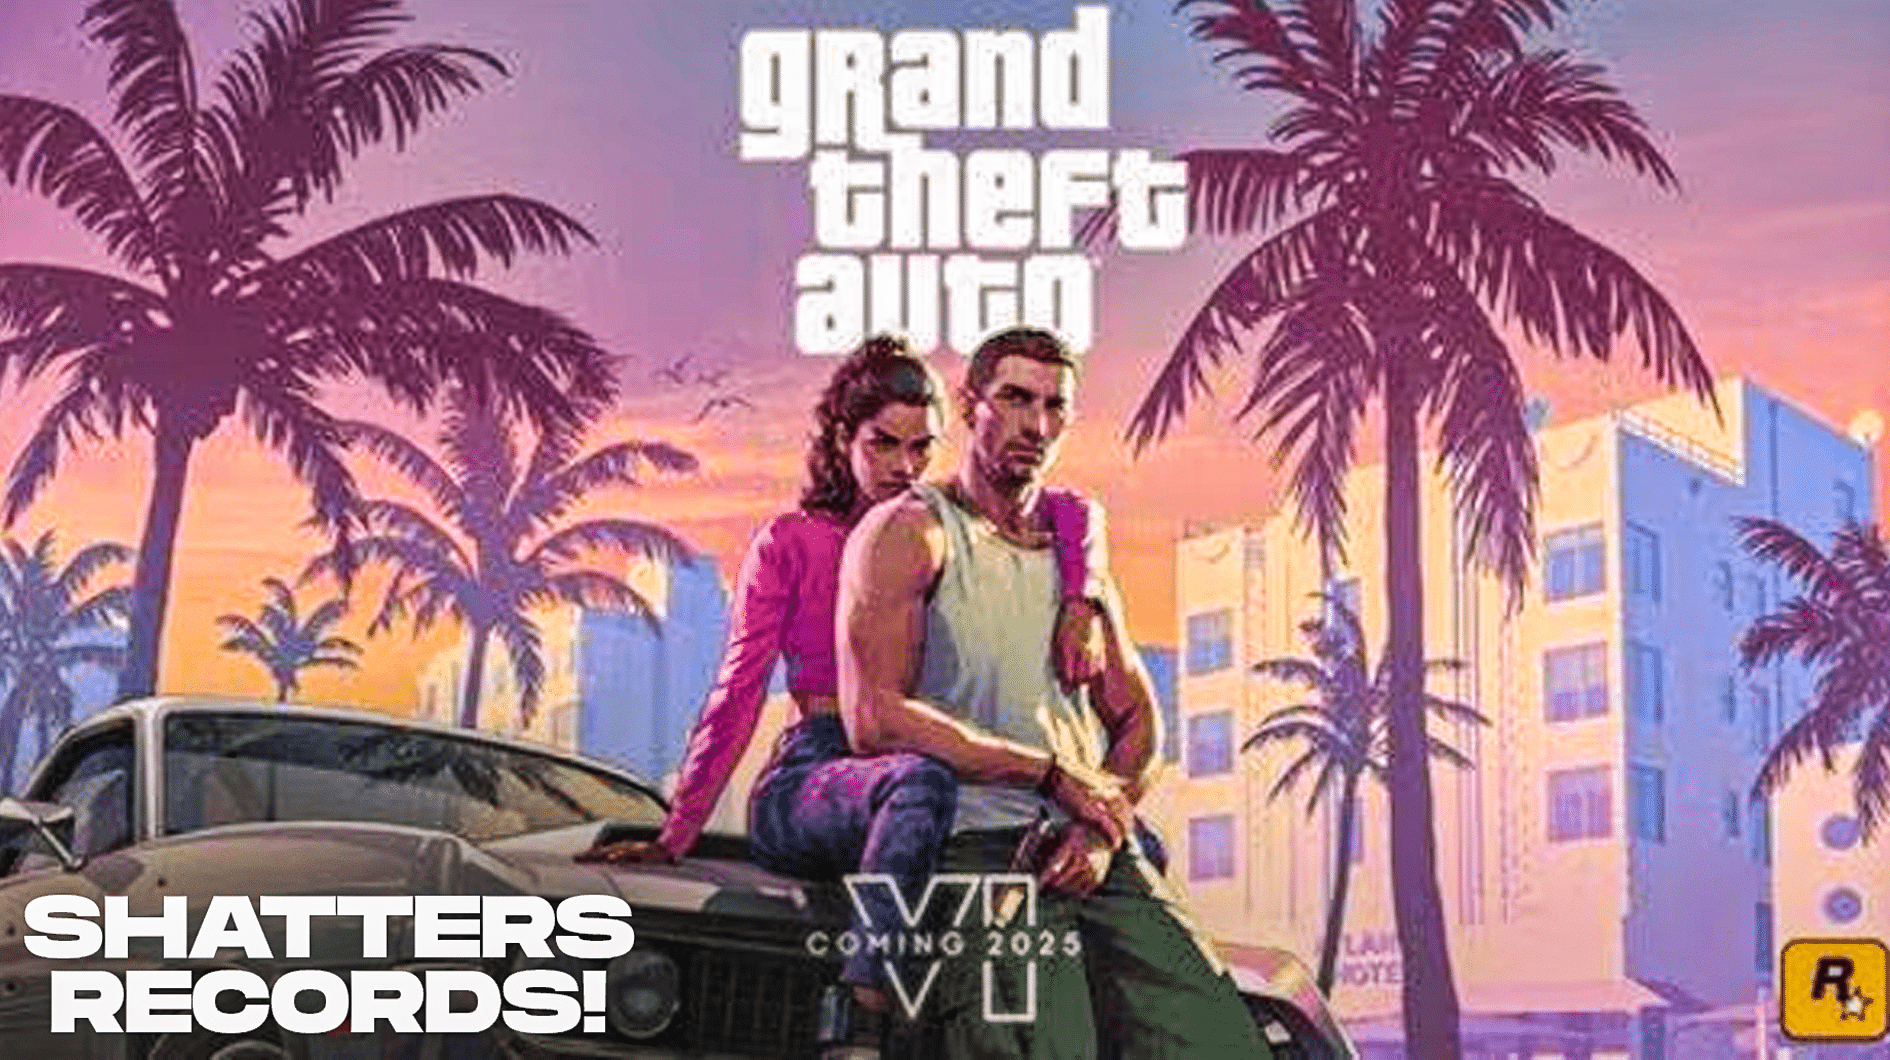 Rockstar Games on X: GTA+ Members now get access to download and play a  rotating assortment of classic Rockstar Games titles, starting with Grand  Theft Auto: The Trilogy – The Definitive Edition.